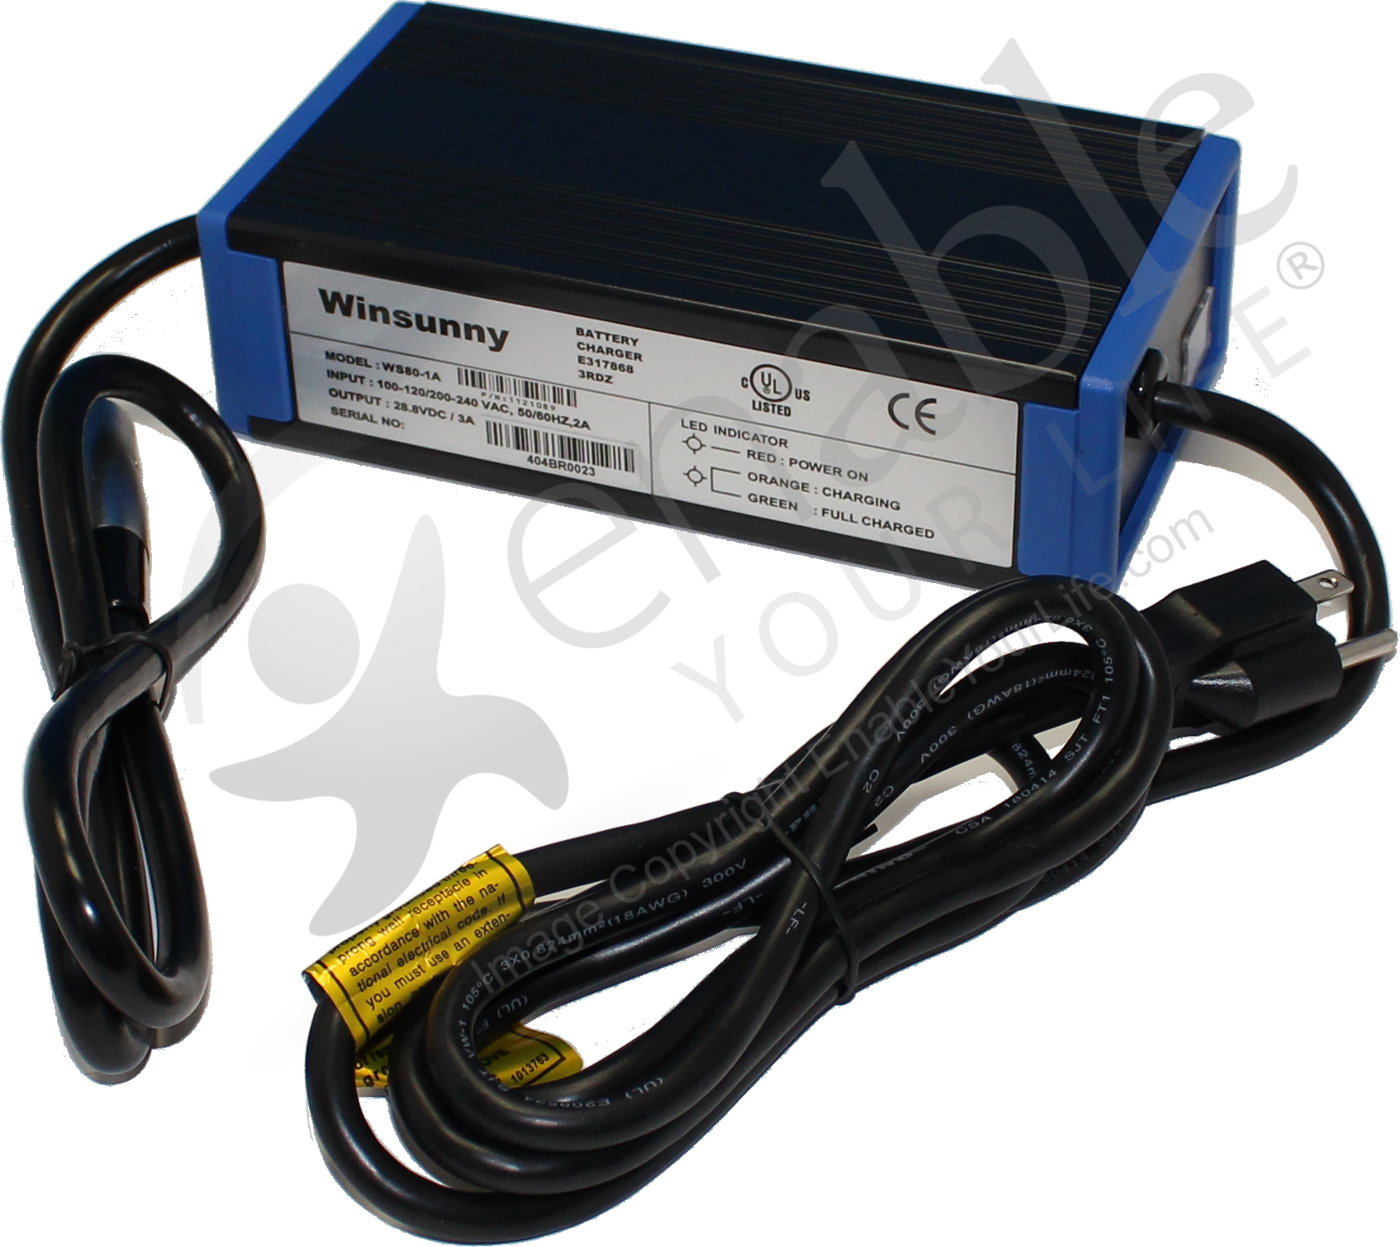 Winsunny 3 Amp Wheelchair / Scooter Battery Charger with XLR Connector